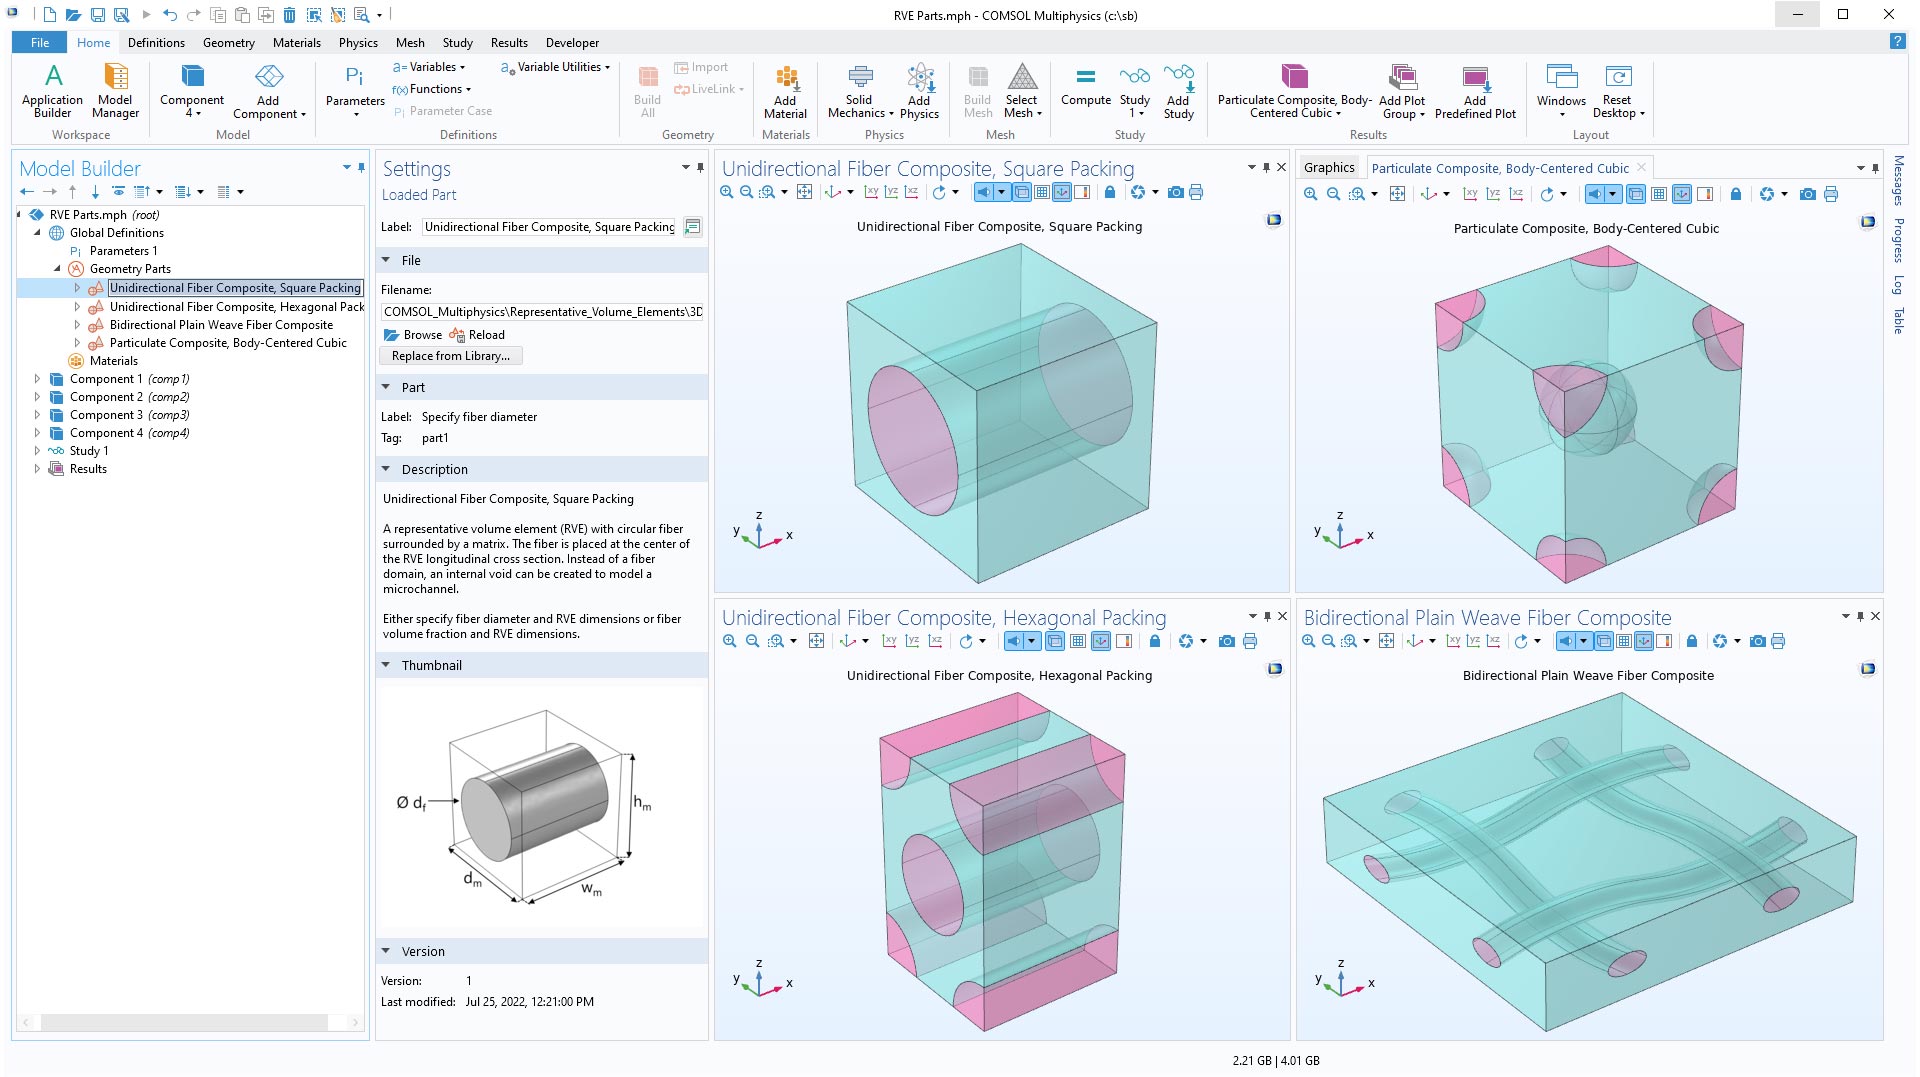 The COMSOL Multiphysics UI showing the Model Builder with a Loaded Part node highlighted, the corresponding Settings window, and four Graphics windows.